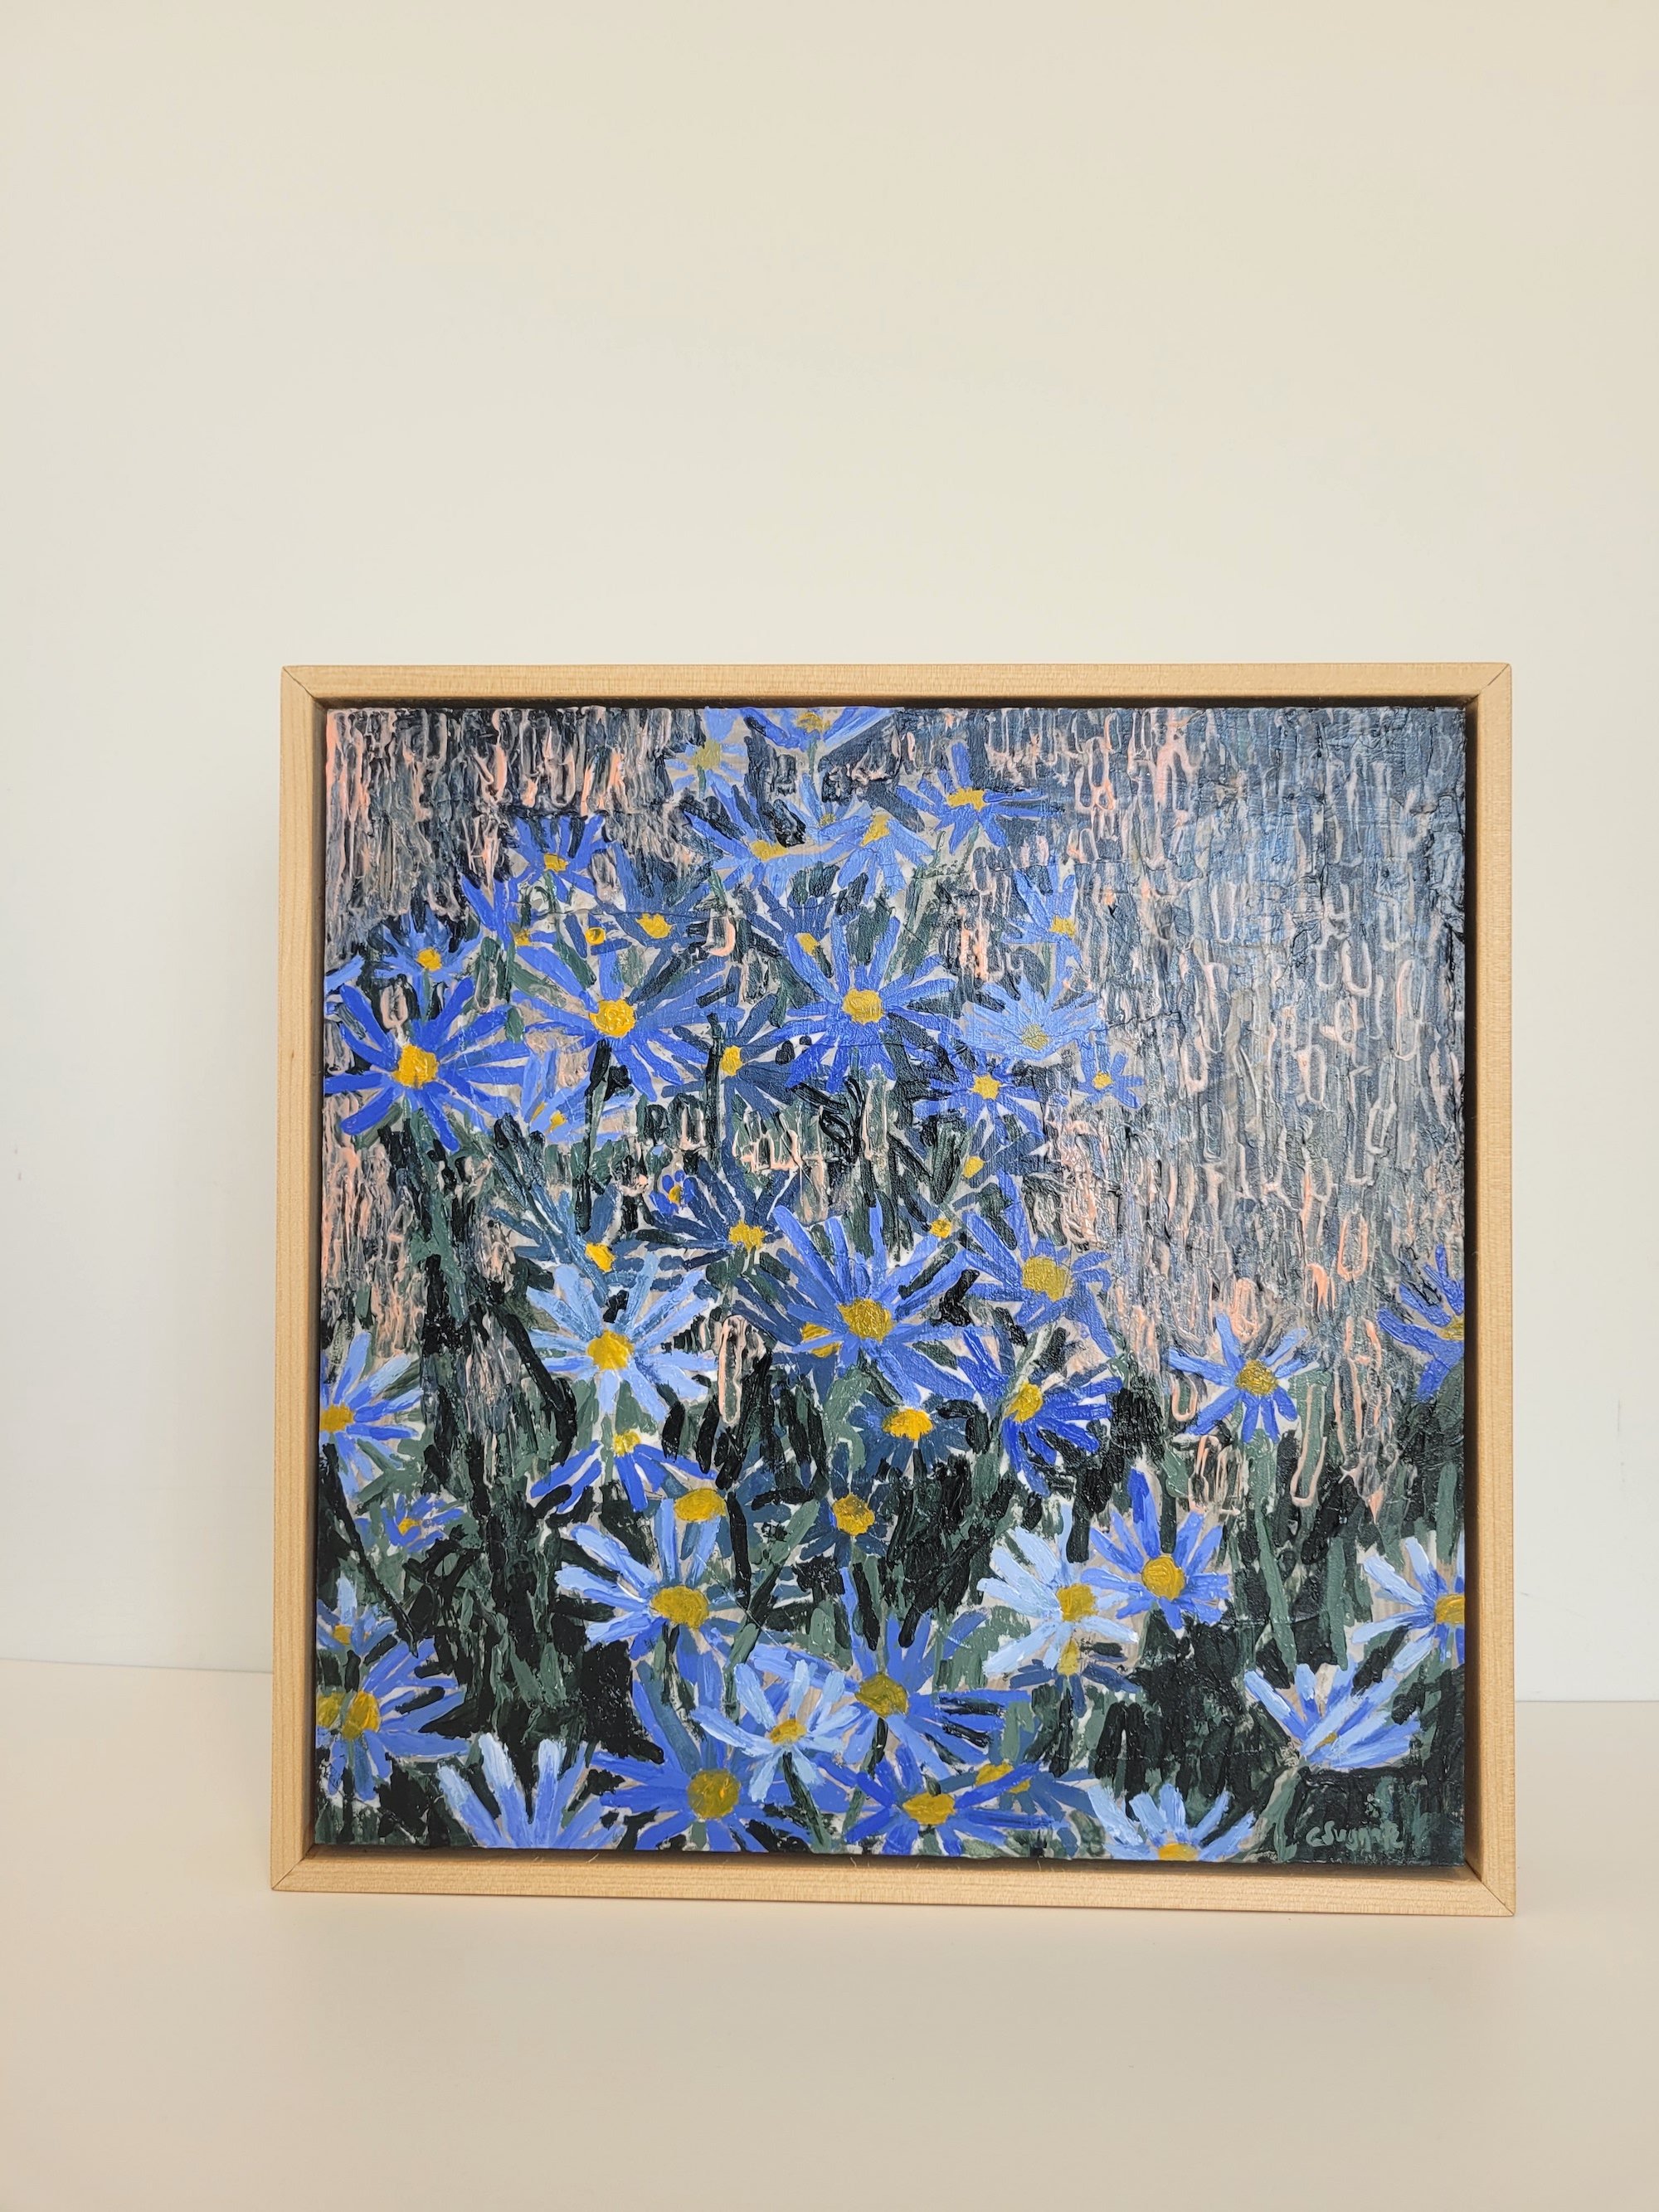 New Zealand floral and abstract Art for Sale — Charlotte Suggate